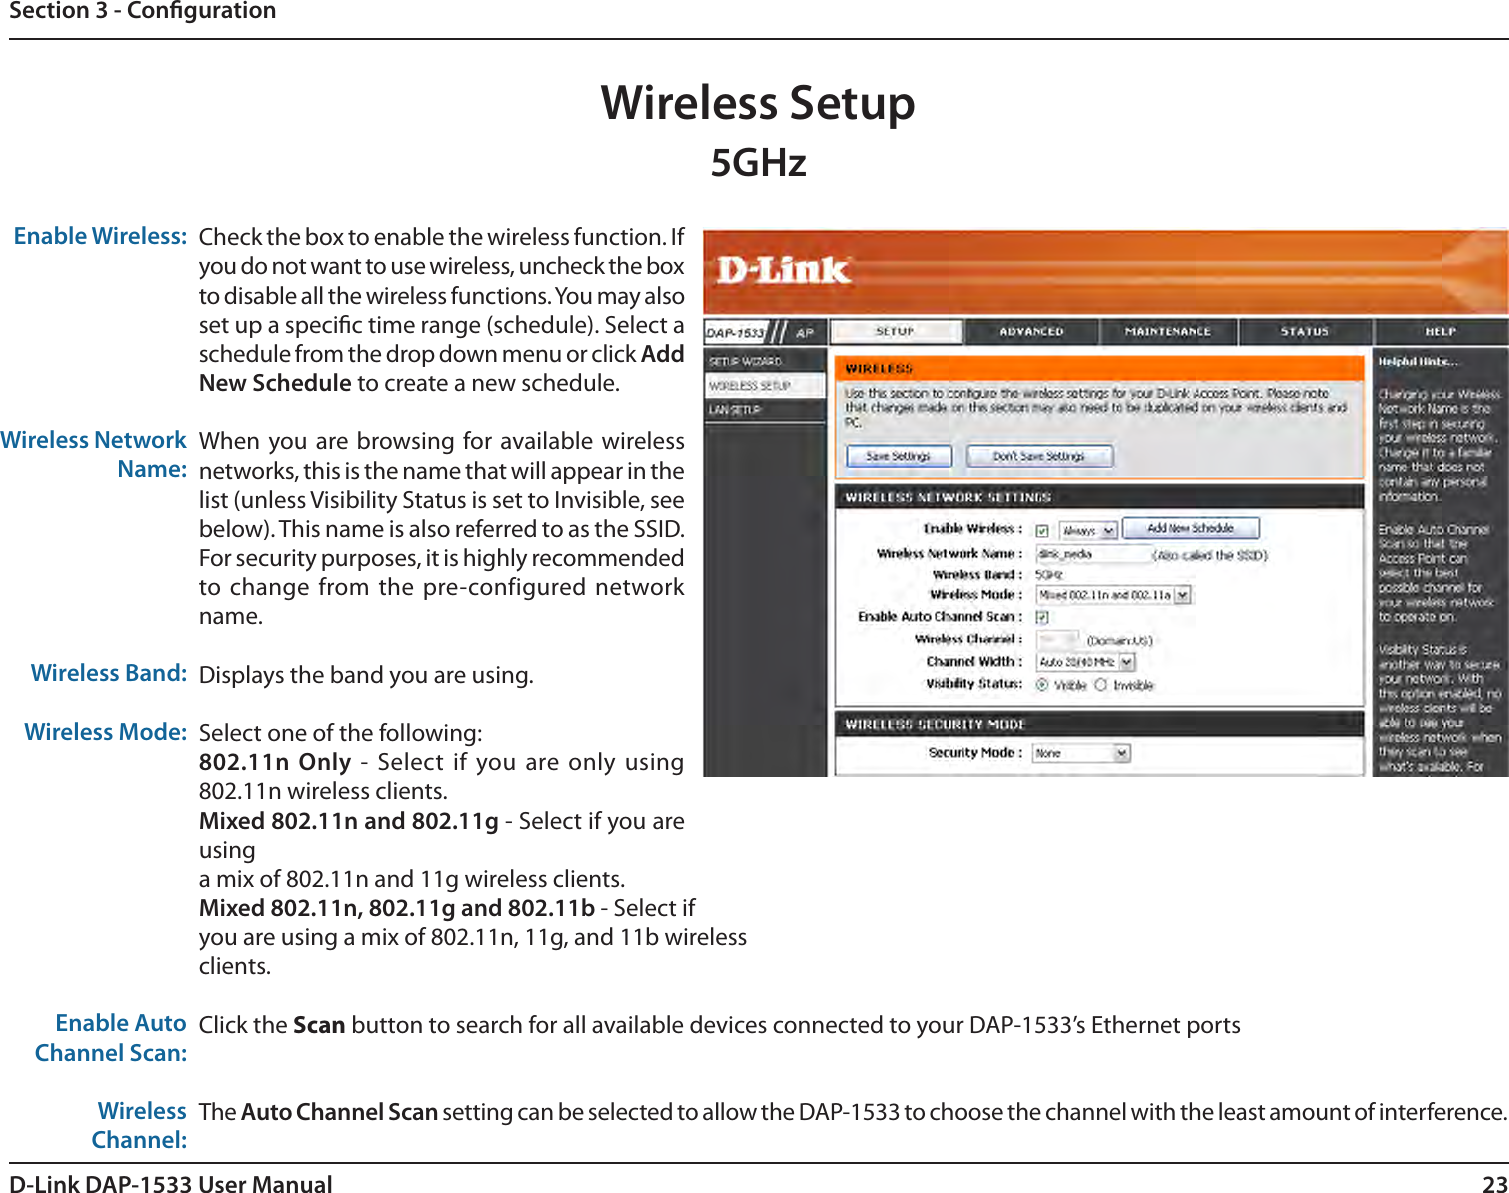 23D-Link DAP-1533 User ManualSection 3 - CongurationWireless Setup5GHzEnable Wireless:Wireless Network Name:Wireless Band:Wireless Mode:Enable Auto Channel Scan:Wireless Channel: Check the box to enable the wireless function. If you do not want to use wireless, uncheck the box to disable all the wireless functions. You may also set up a specic time range (schedule). Select a schedule from the drop down menu or click Add New Schedule to create a new schedule.When you are browsing for available wireless networks, this is the name that will appear in the list (unless Visibility Status is set to Invisible, see below). This name is also referred to as the SSID. For security purposes, it is highly recommended to change from the pre-configured network name.Displays the band you are using. Select one of the following:802.11n Only - Select  if you are only using 802.11n wireless clients.Mixed 802.11n and 802.11g - Select if you are usinga mix of 802.11n and 11g wireless clients.Mixed 802.11n, 802.11g and 802.11b - Select ifyou are using a mix of 802.11n, 11g, and 11b wirelessclients.Click the Scan button to search for all available devices connected to your DAP-1533’s Ethernet portsThe Auto Channel Scan setting can be selected to allow the DAP-1533 to choose the channel with the least amount of interference.